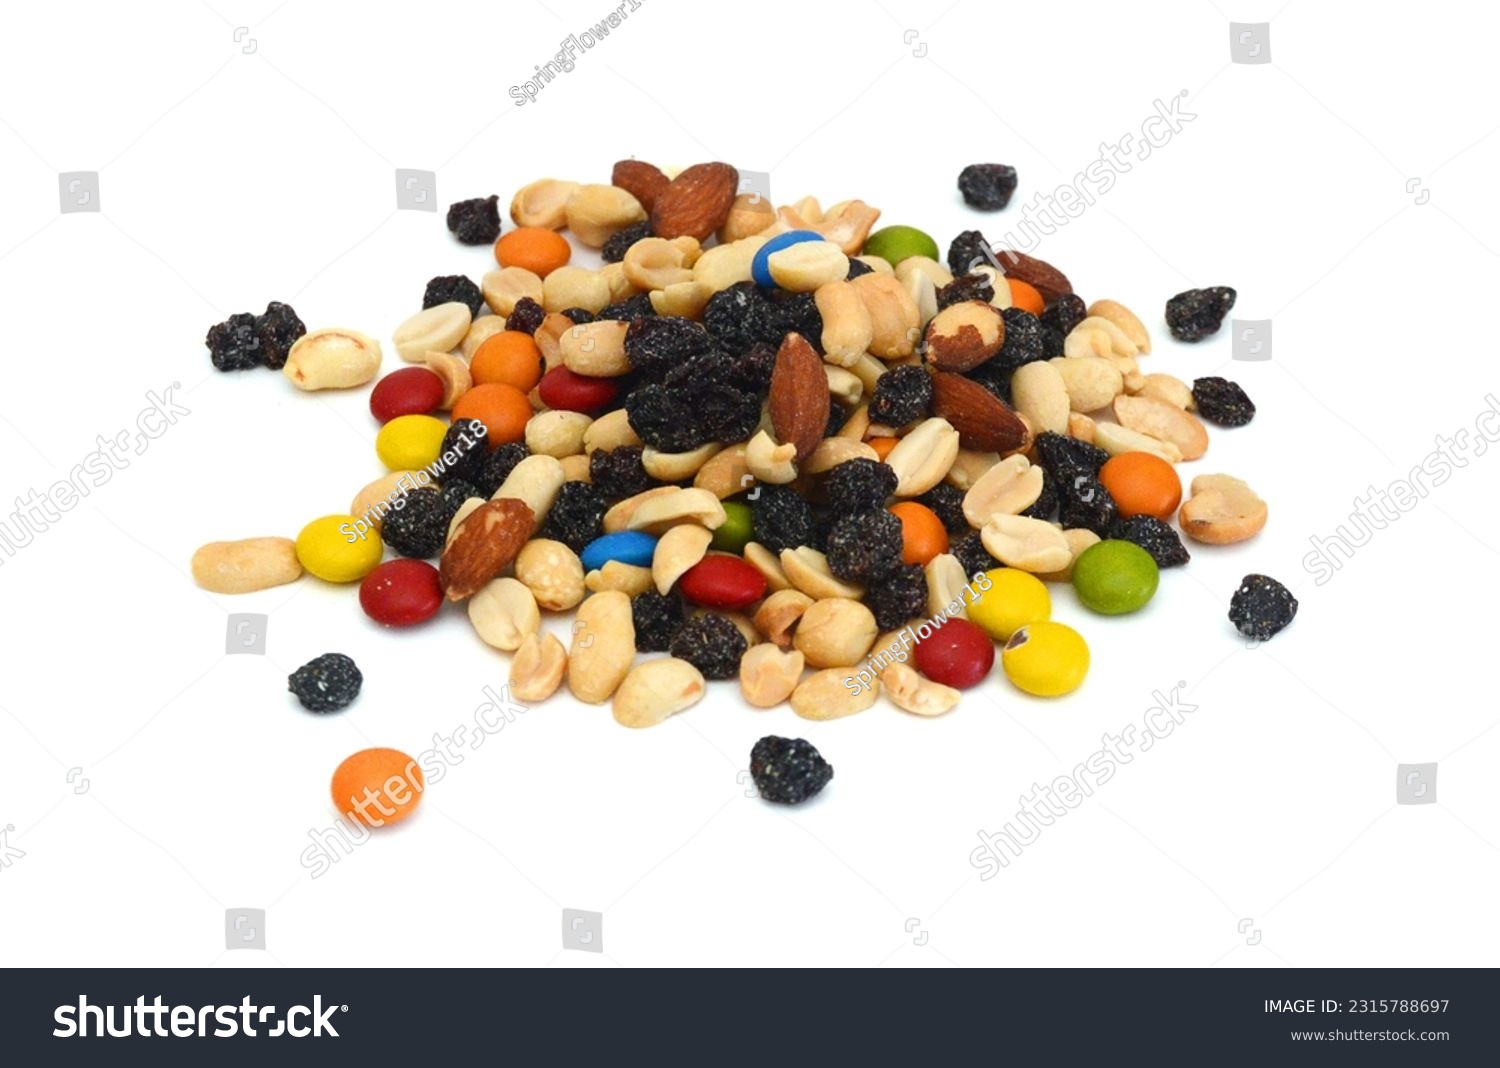 Mix nuts, dry fruits and grapes on a white background #2315788697